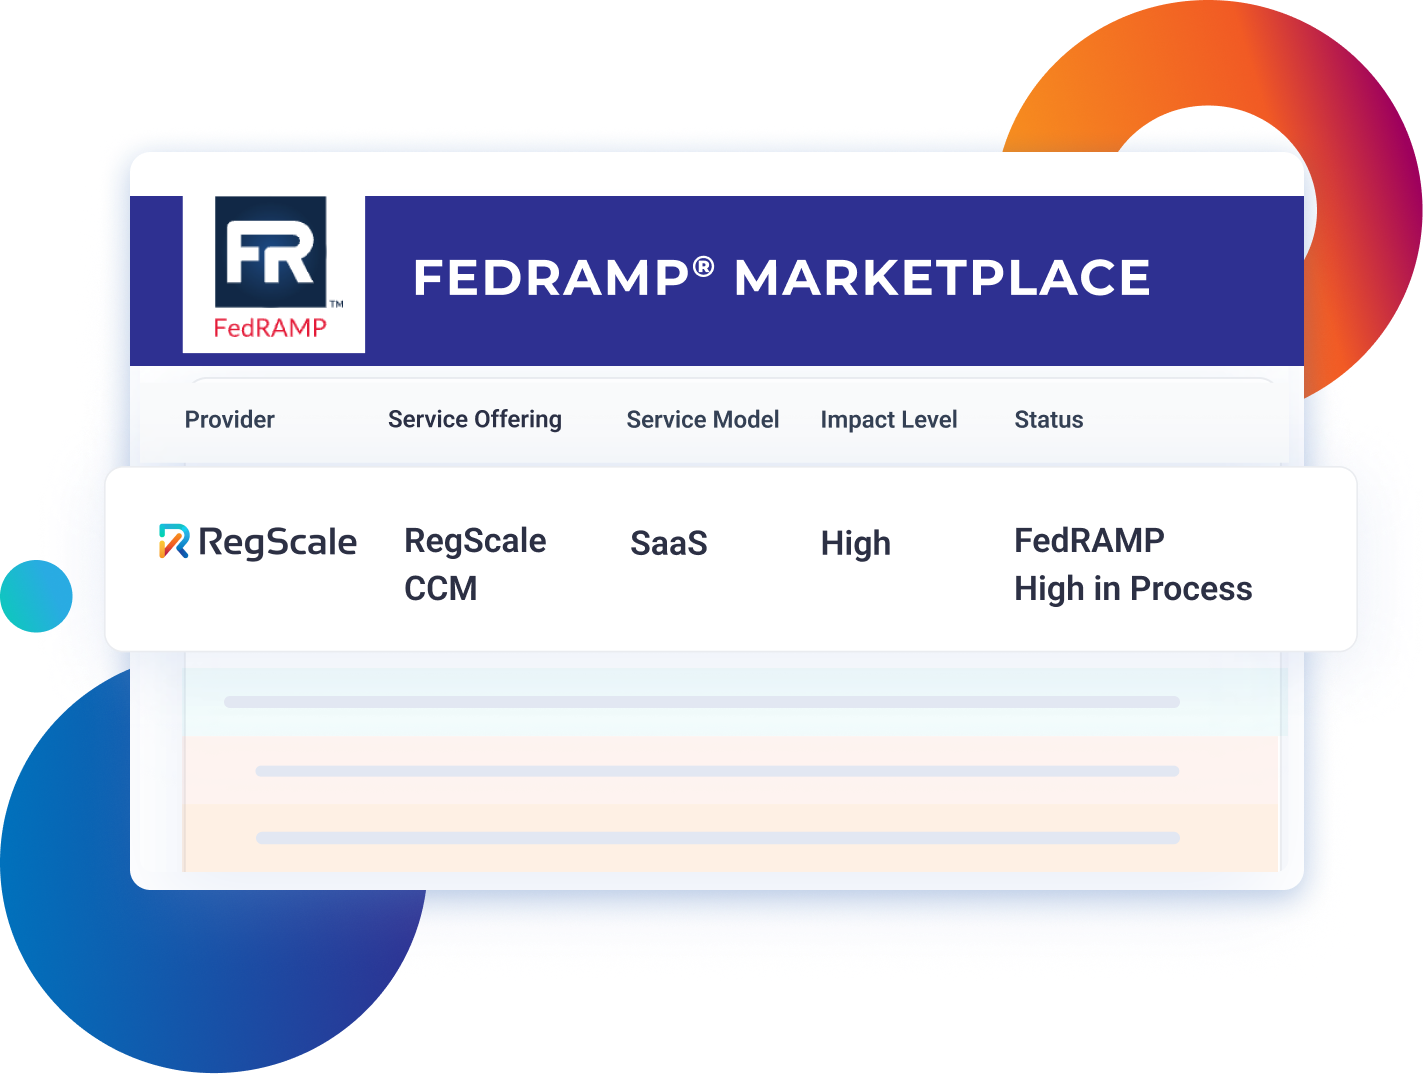 RegScale CCM on the FedRAMP Marketplace